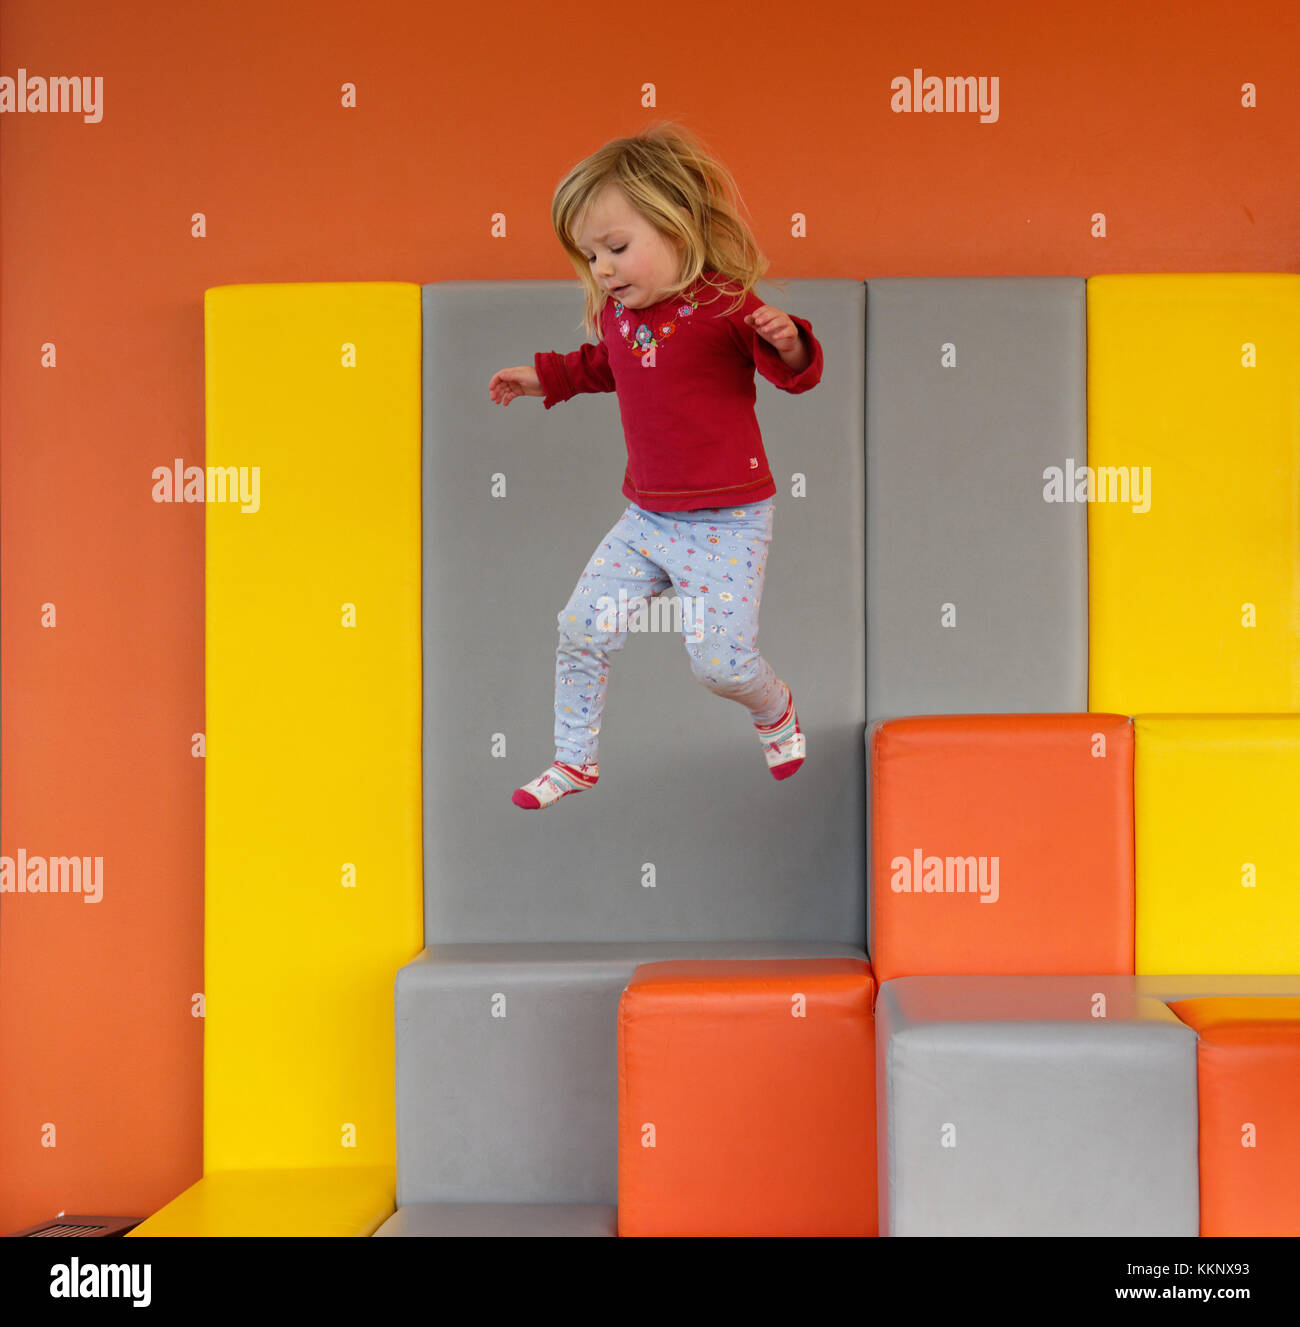 A little girl (3 yrs old) jumping in a padded play area Stock Photo